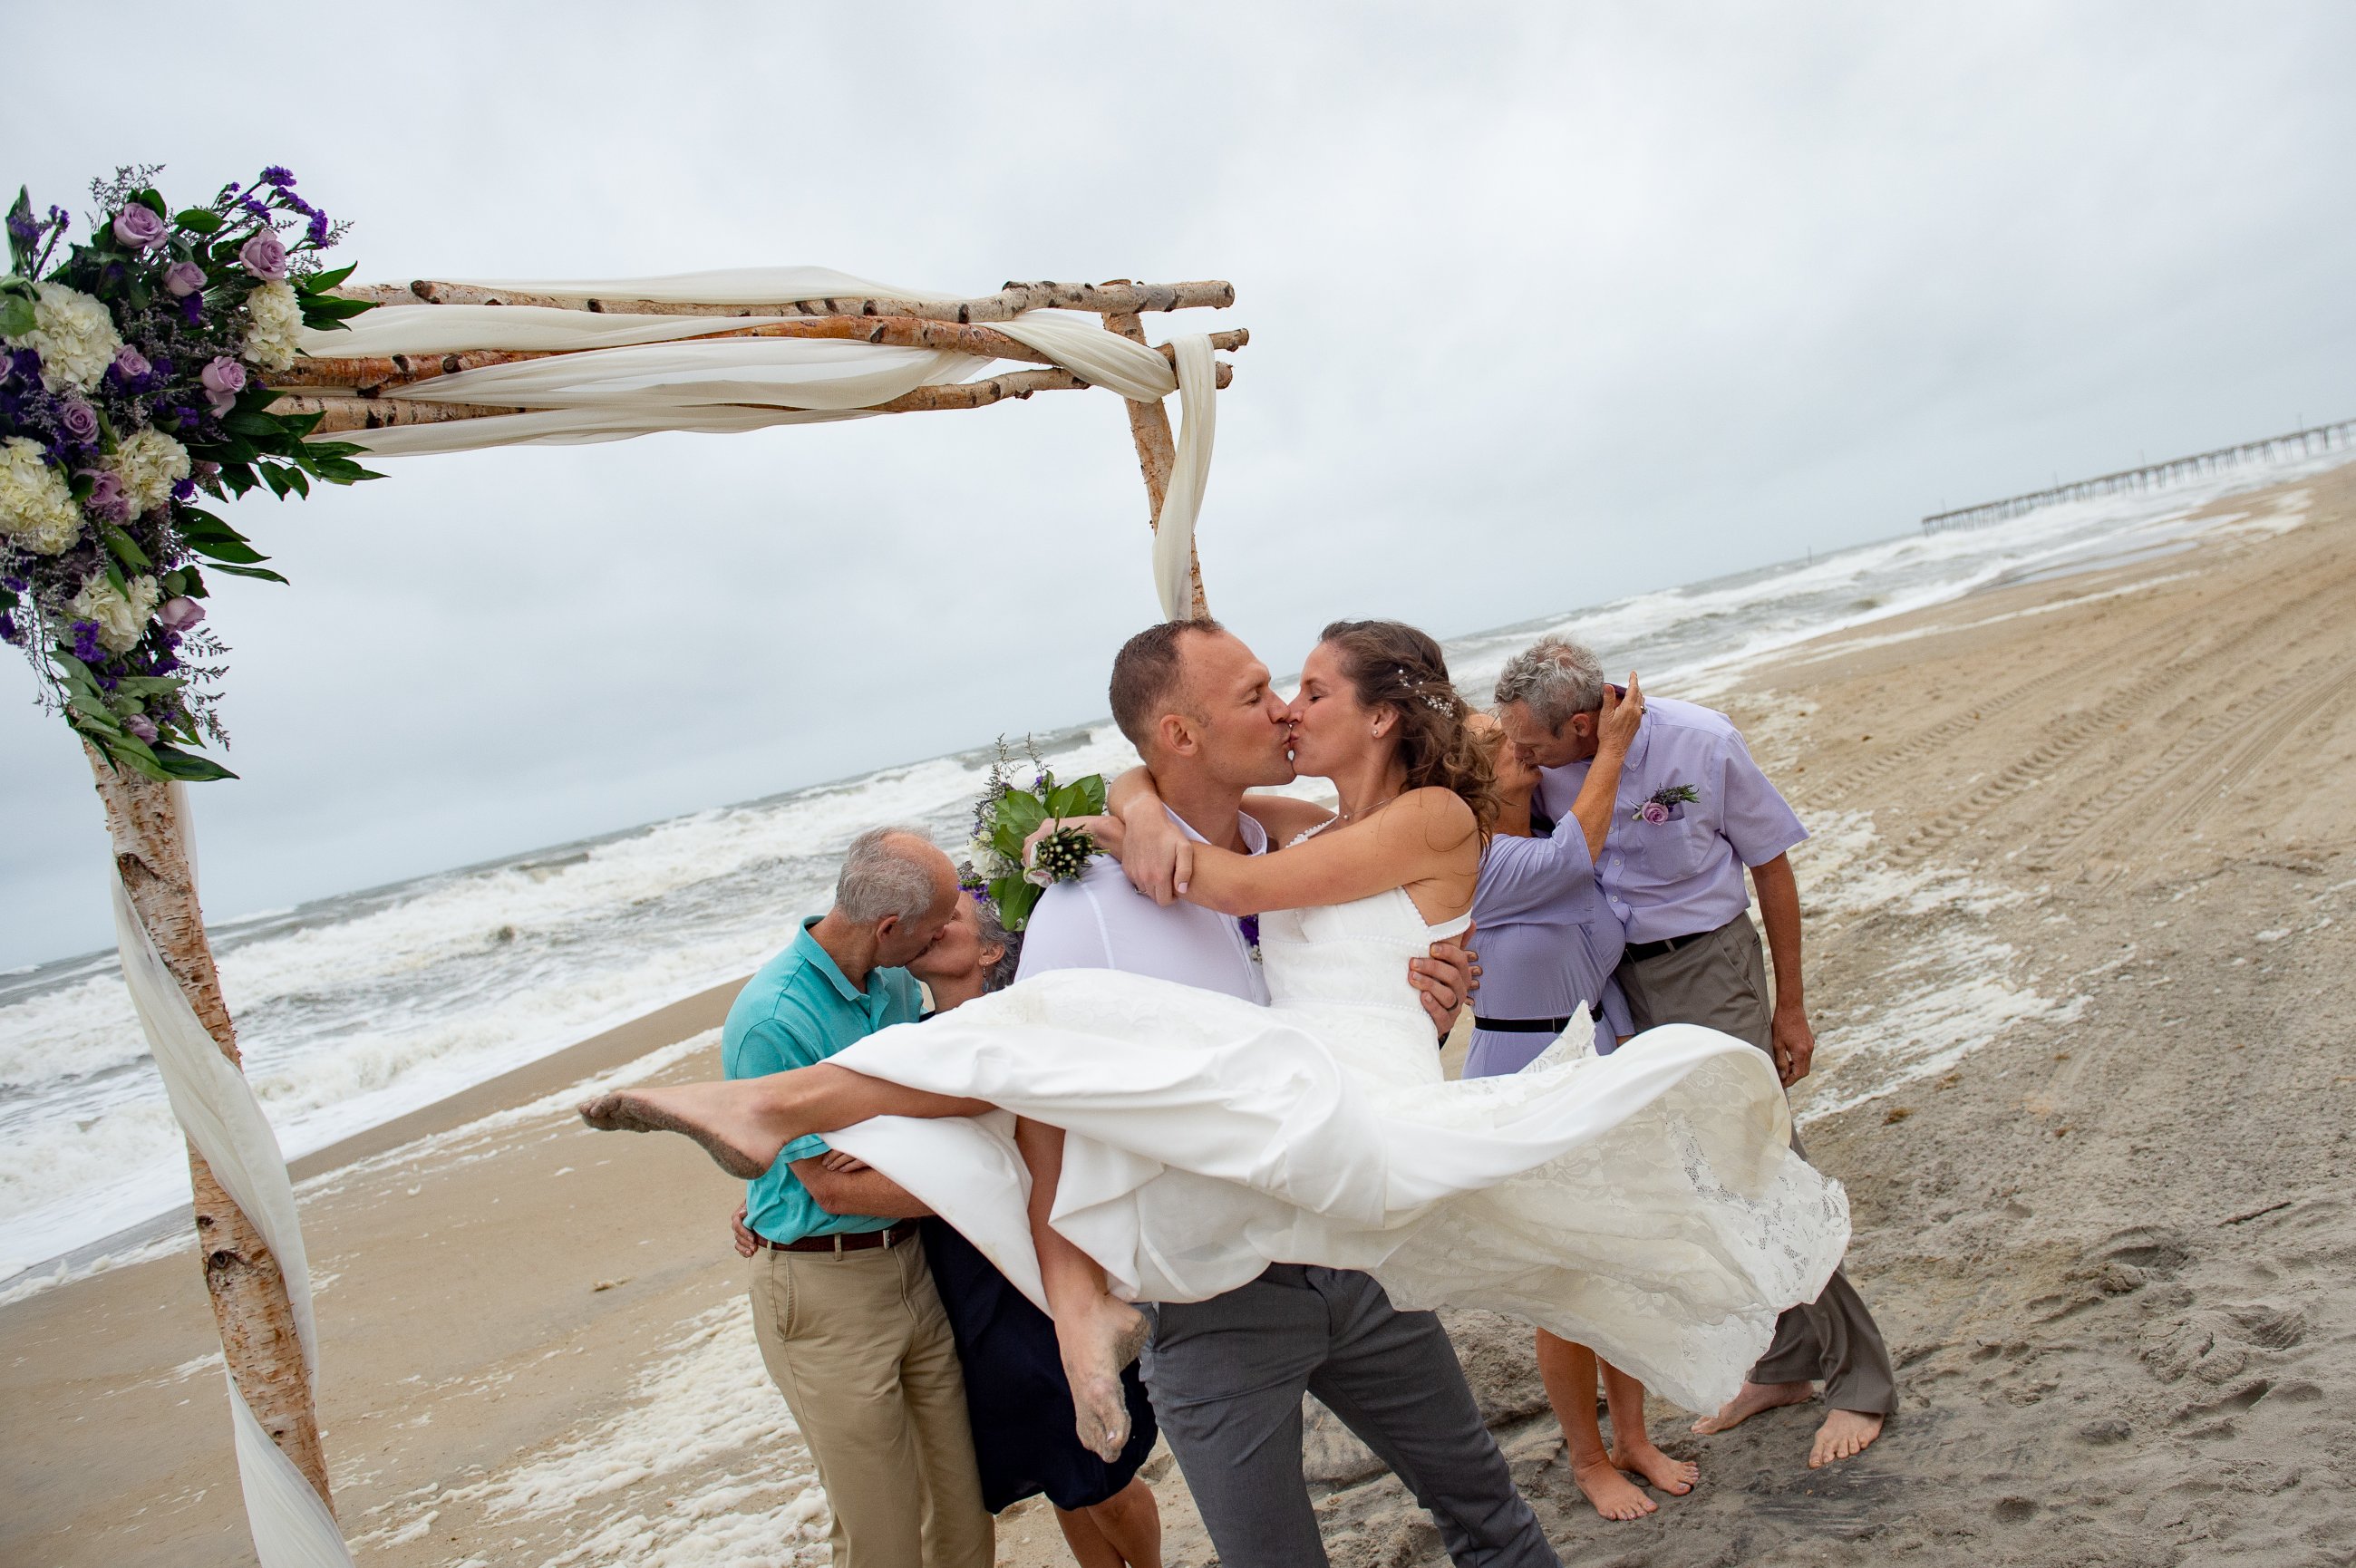 Jason S Favorite Photos Of 2019 7 Outer Banks Wedding Photographers Obx And Destination Weddings